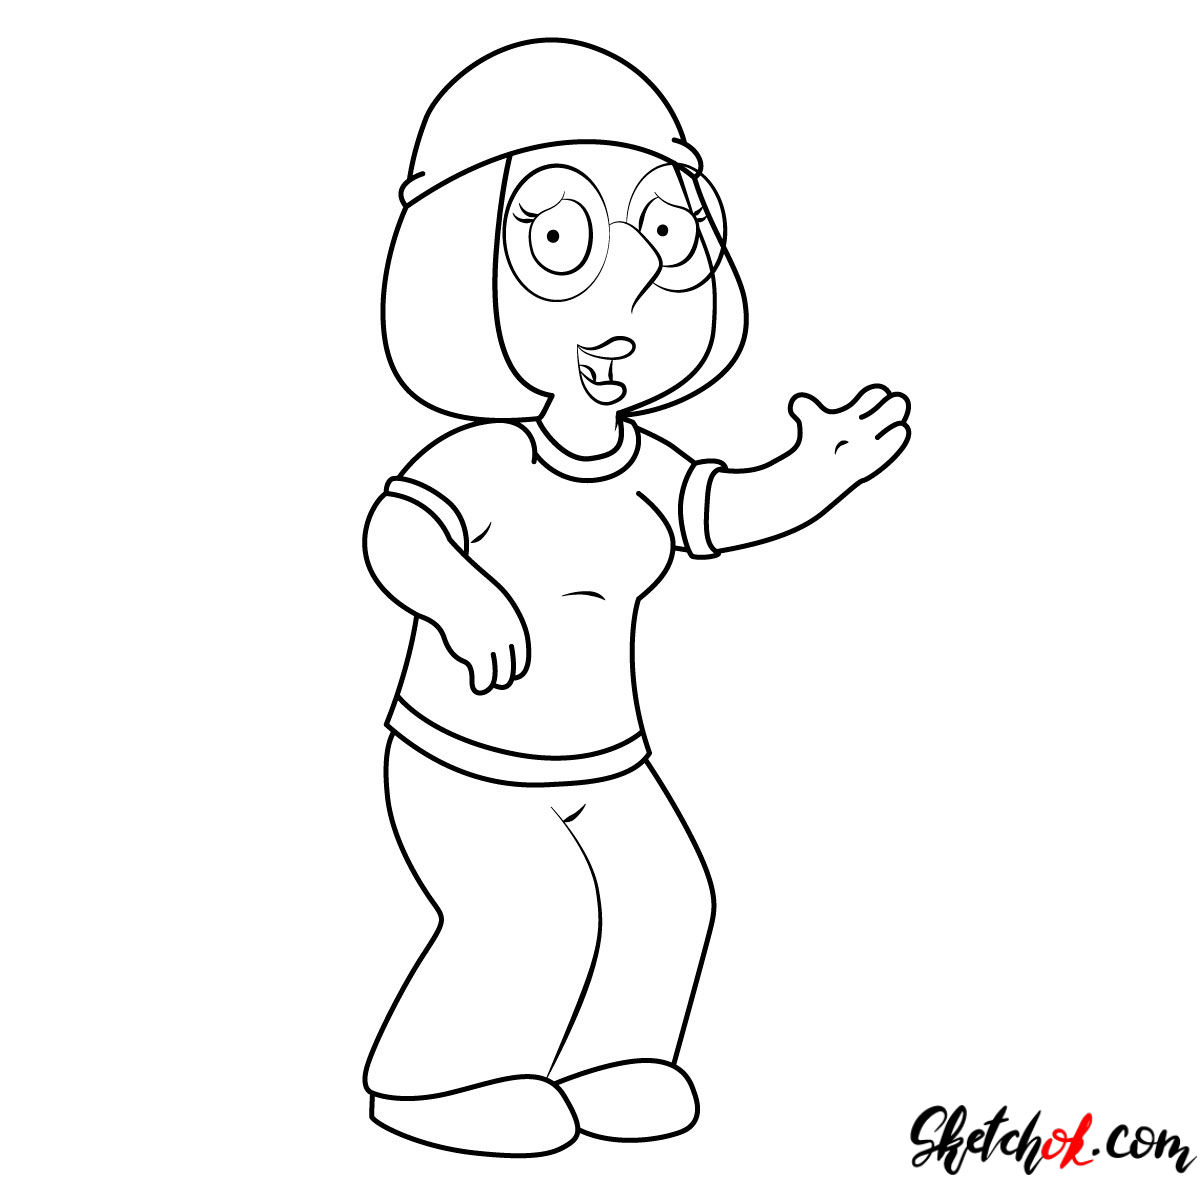 How to draw Meg Griffin - step 10